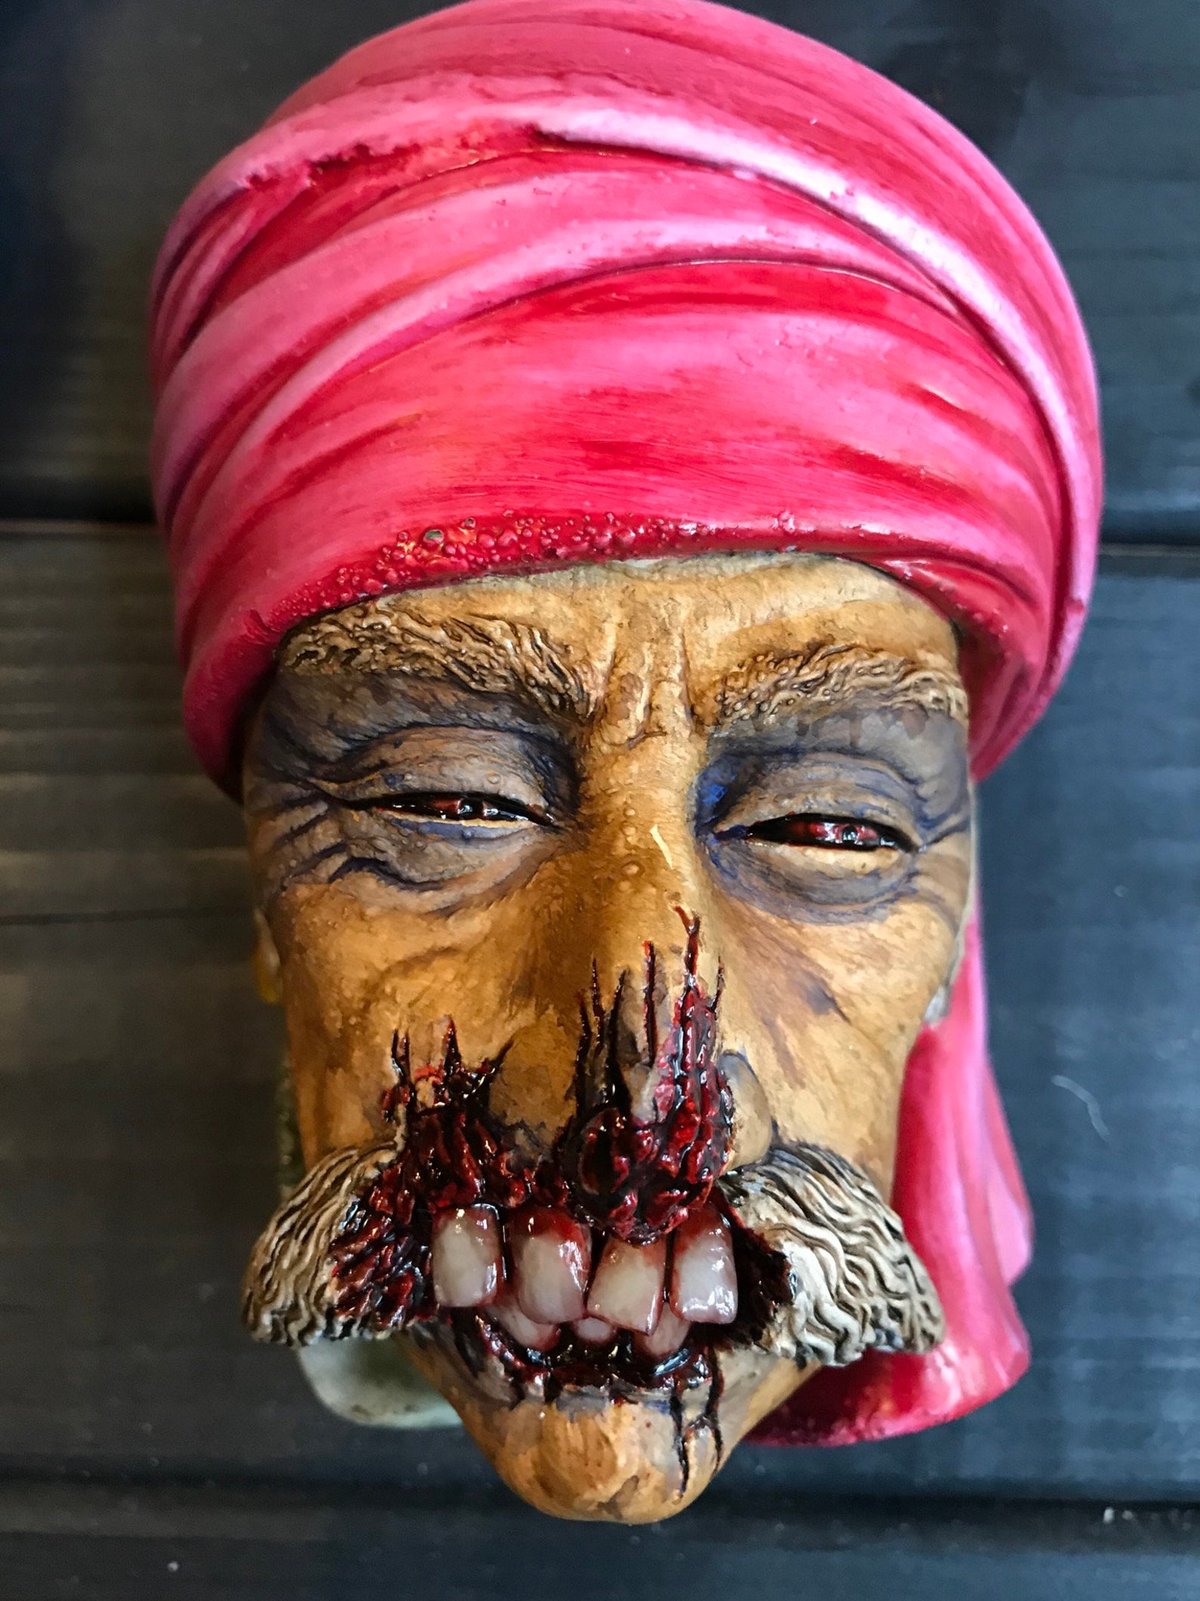 Zombies of the World - Red Turban 1/1